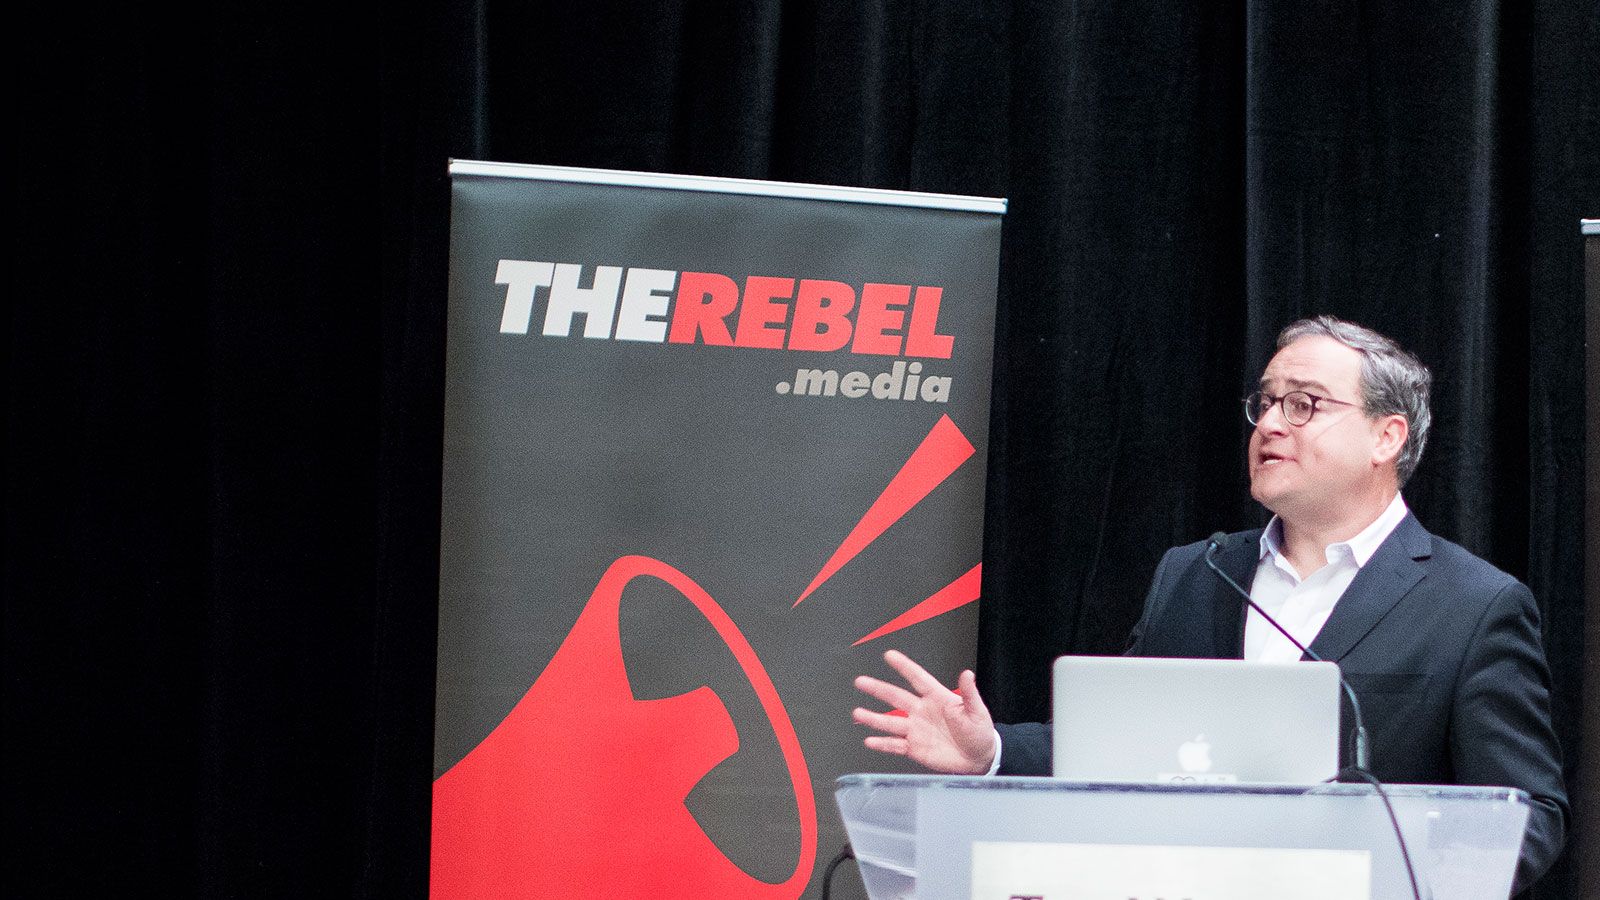 Ezra Levant speaks at a Rebel Media event. (Photograph by Chris Bolin)